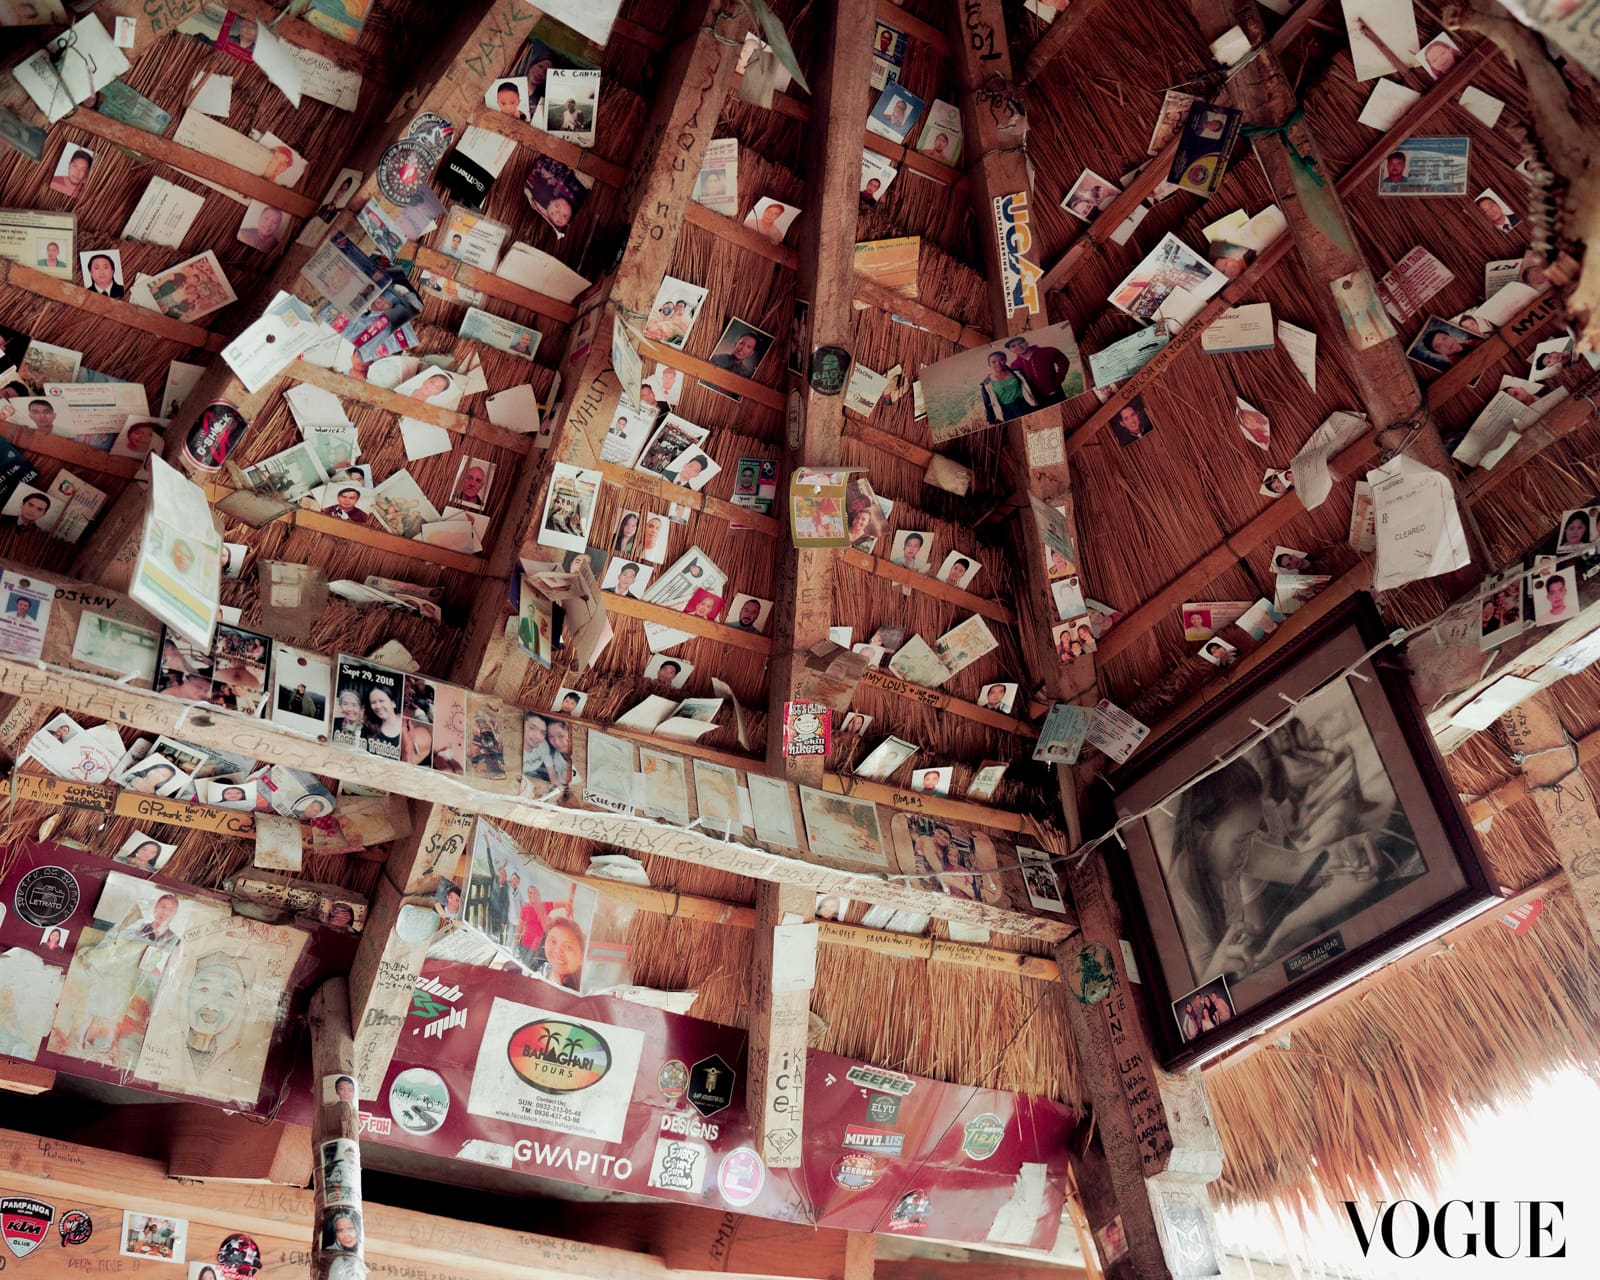 Mementos from travelers adorn the thatched roof of Grace Palicas’ pagbabatok tattoo studio